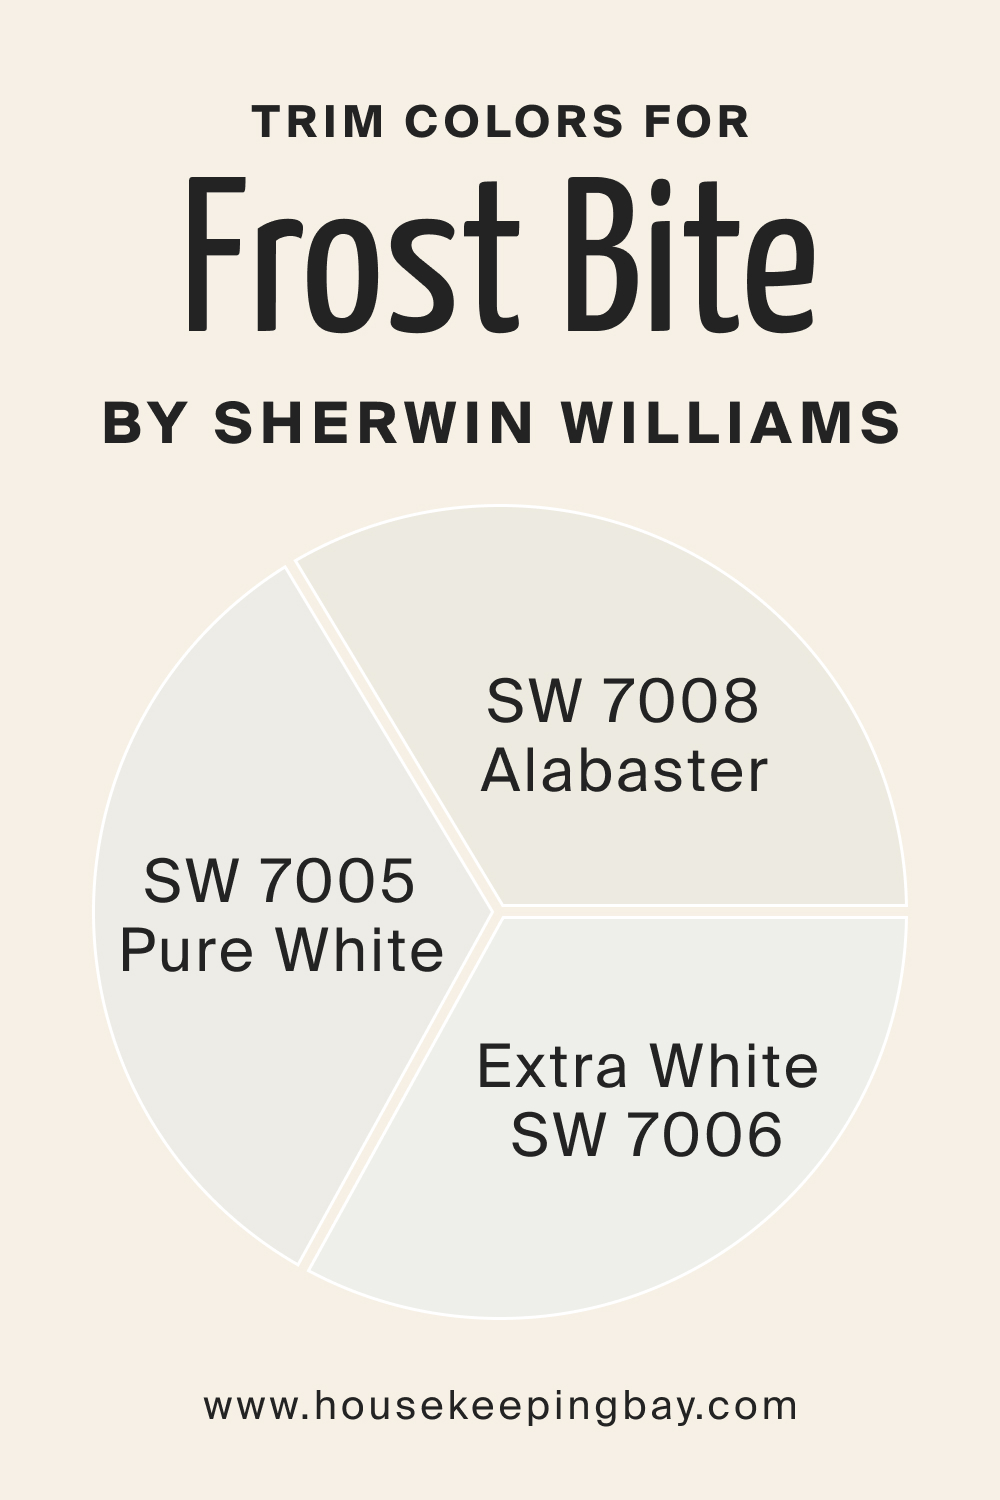 Trim Colors of SW 9505 Frost Bite by Sherwin Williams